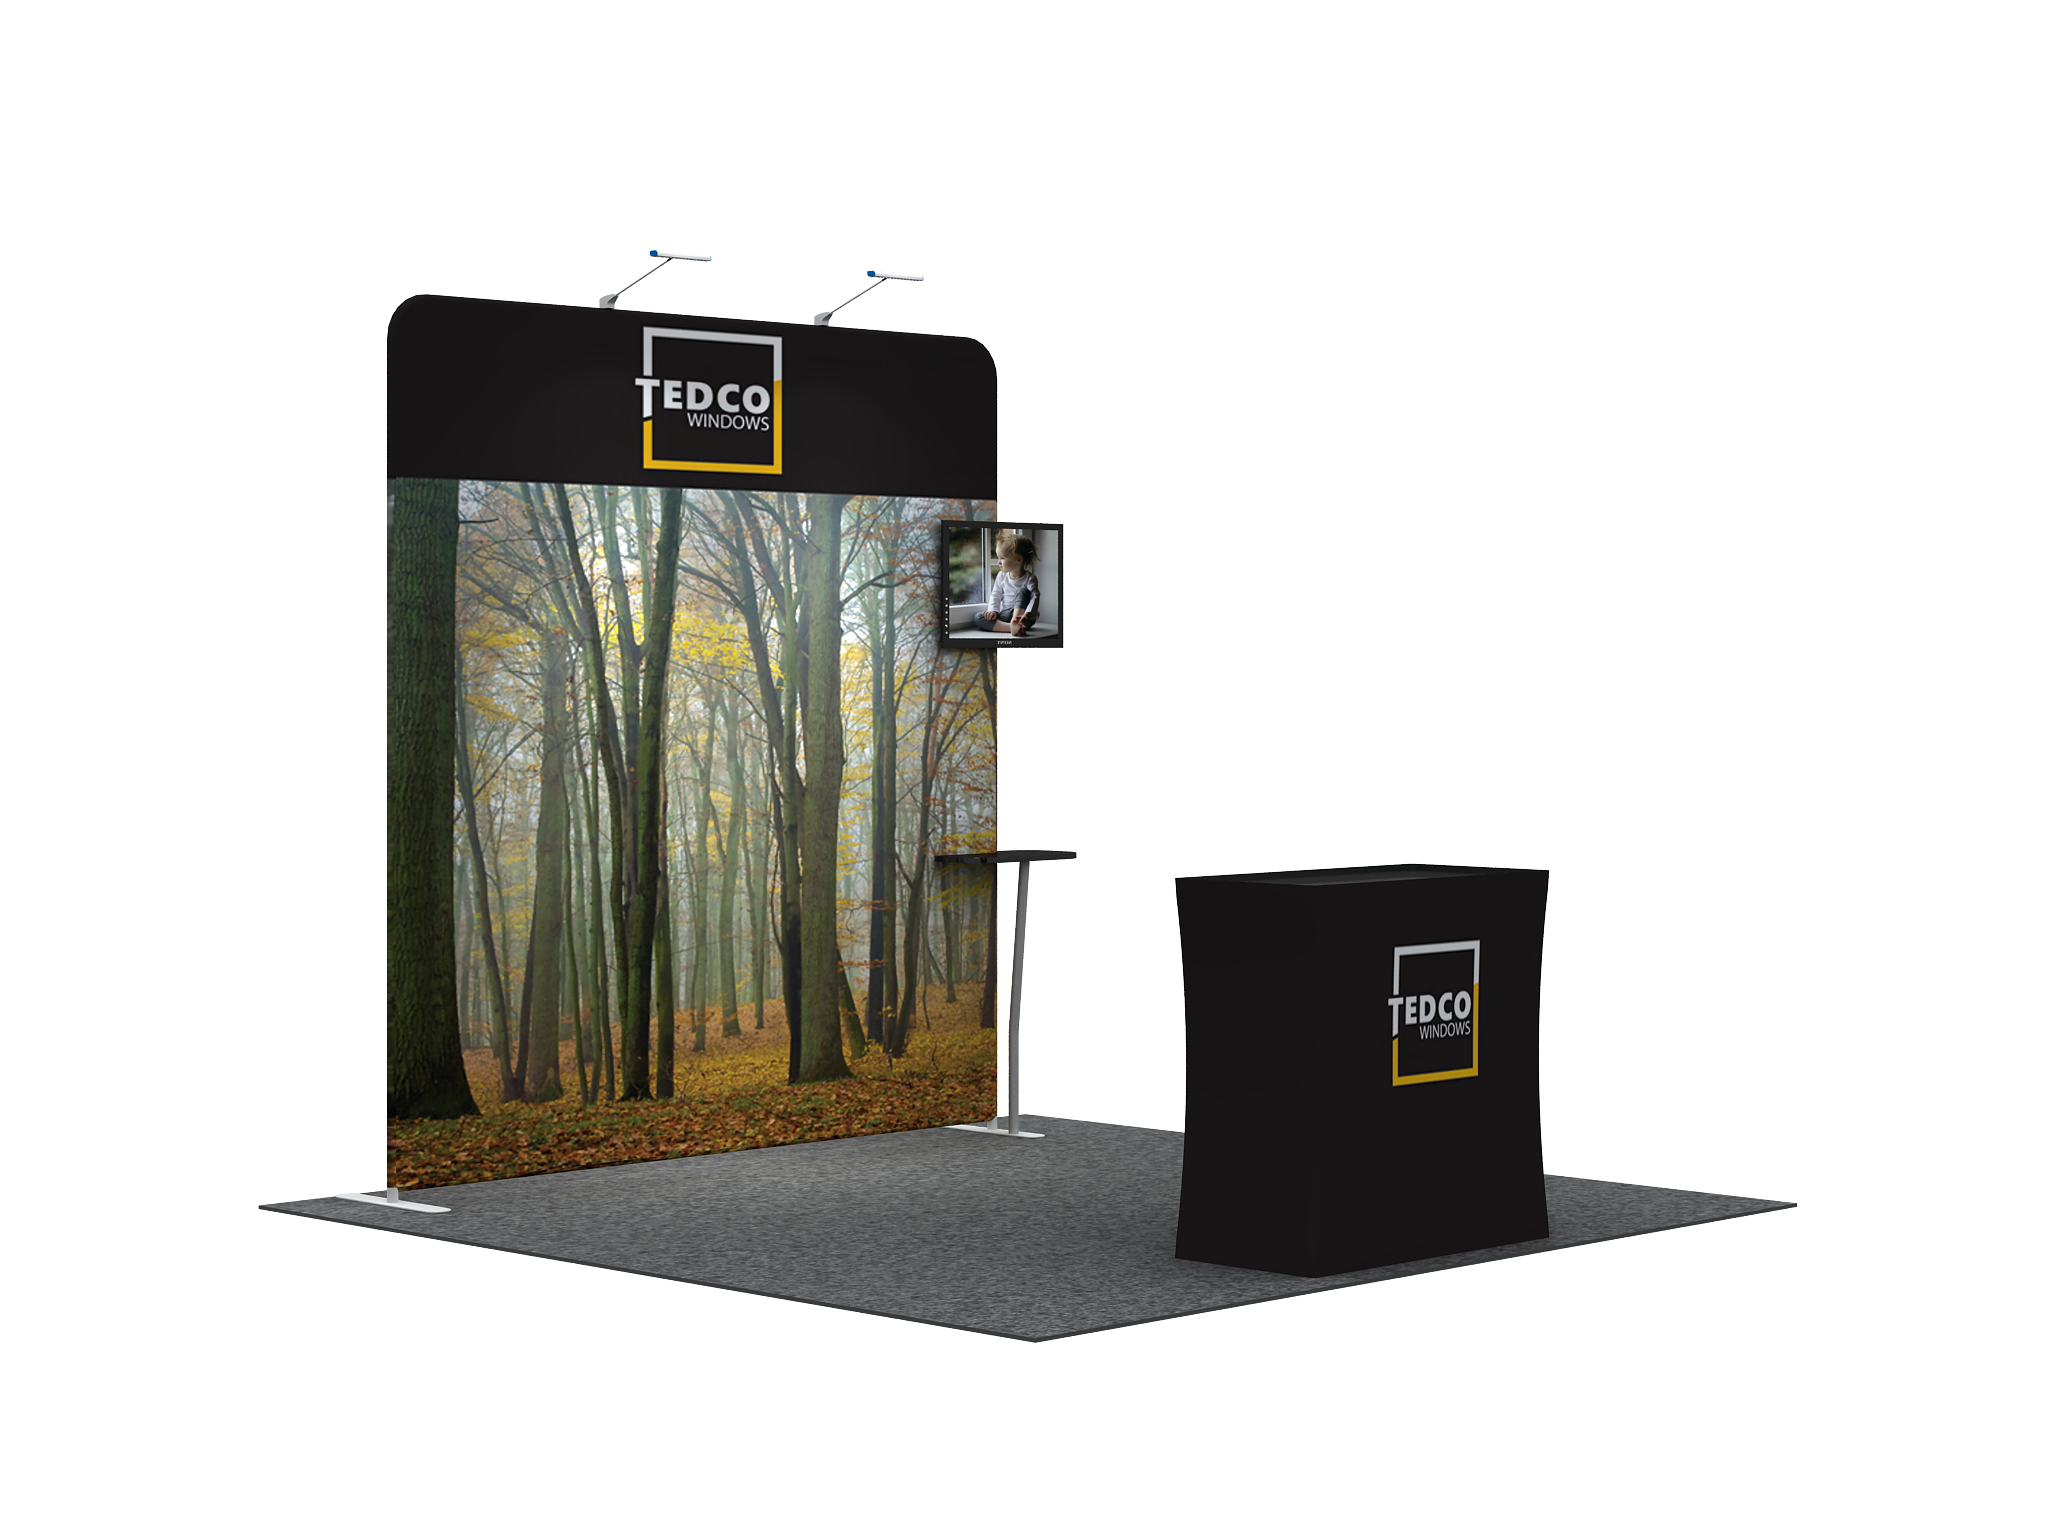 Trade show booth, forest image.